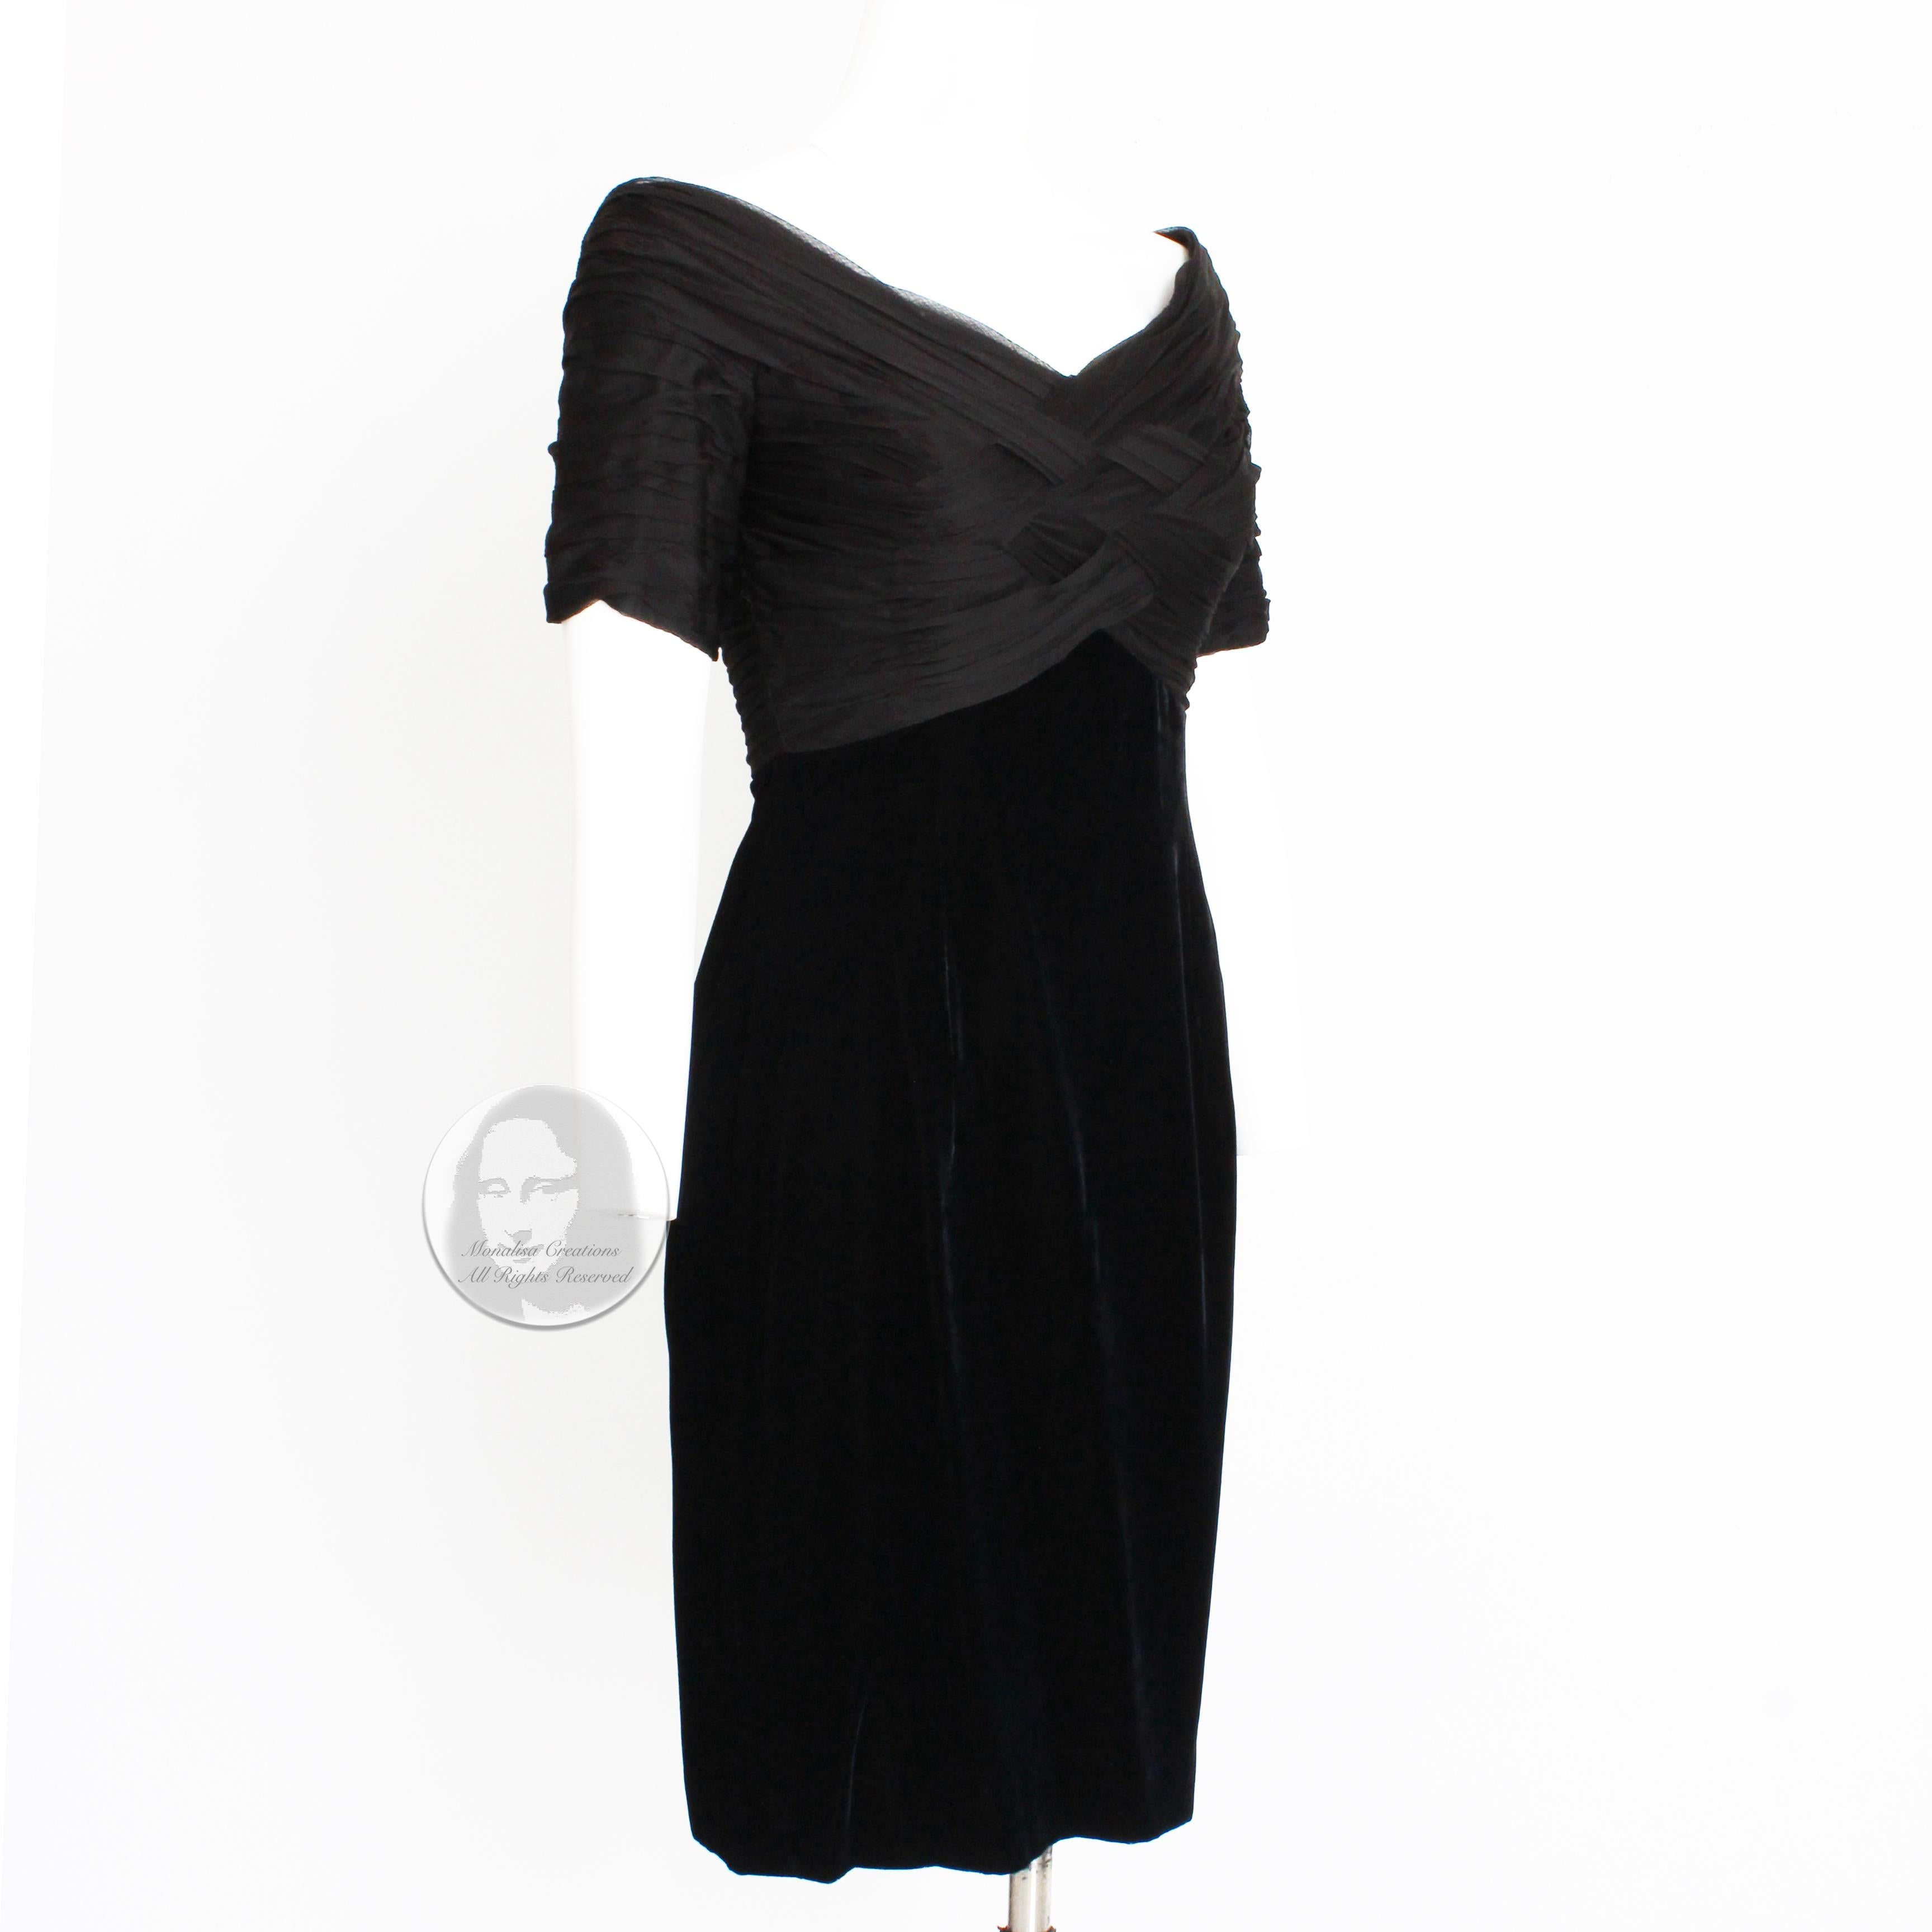 Authentic, preowned, vintage Bellville Sassoon Lorcan Mullany black woven silk bodice cocktail dress, likely made in the 90s.  Made from silk and rayon, it features a gorgeous woven bodice, an empire waist and black velvet skirt.  

An incredibly